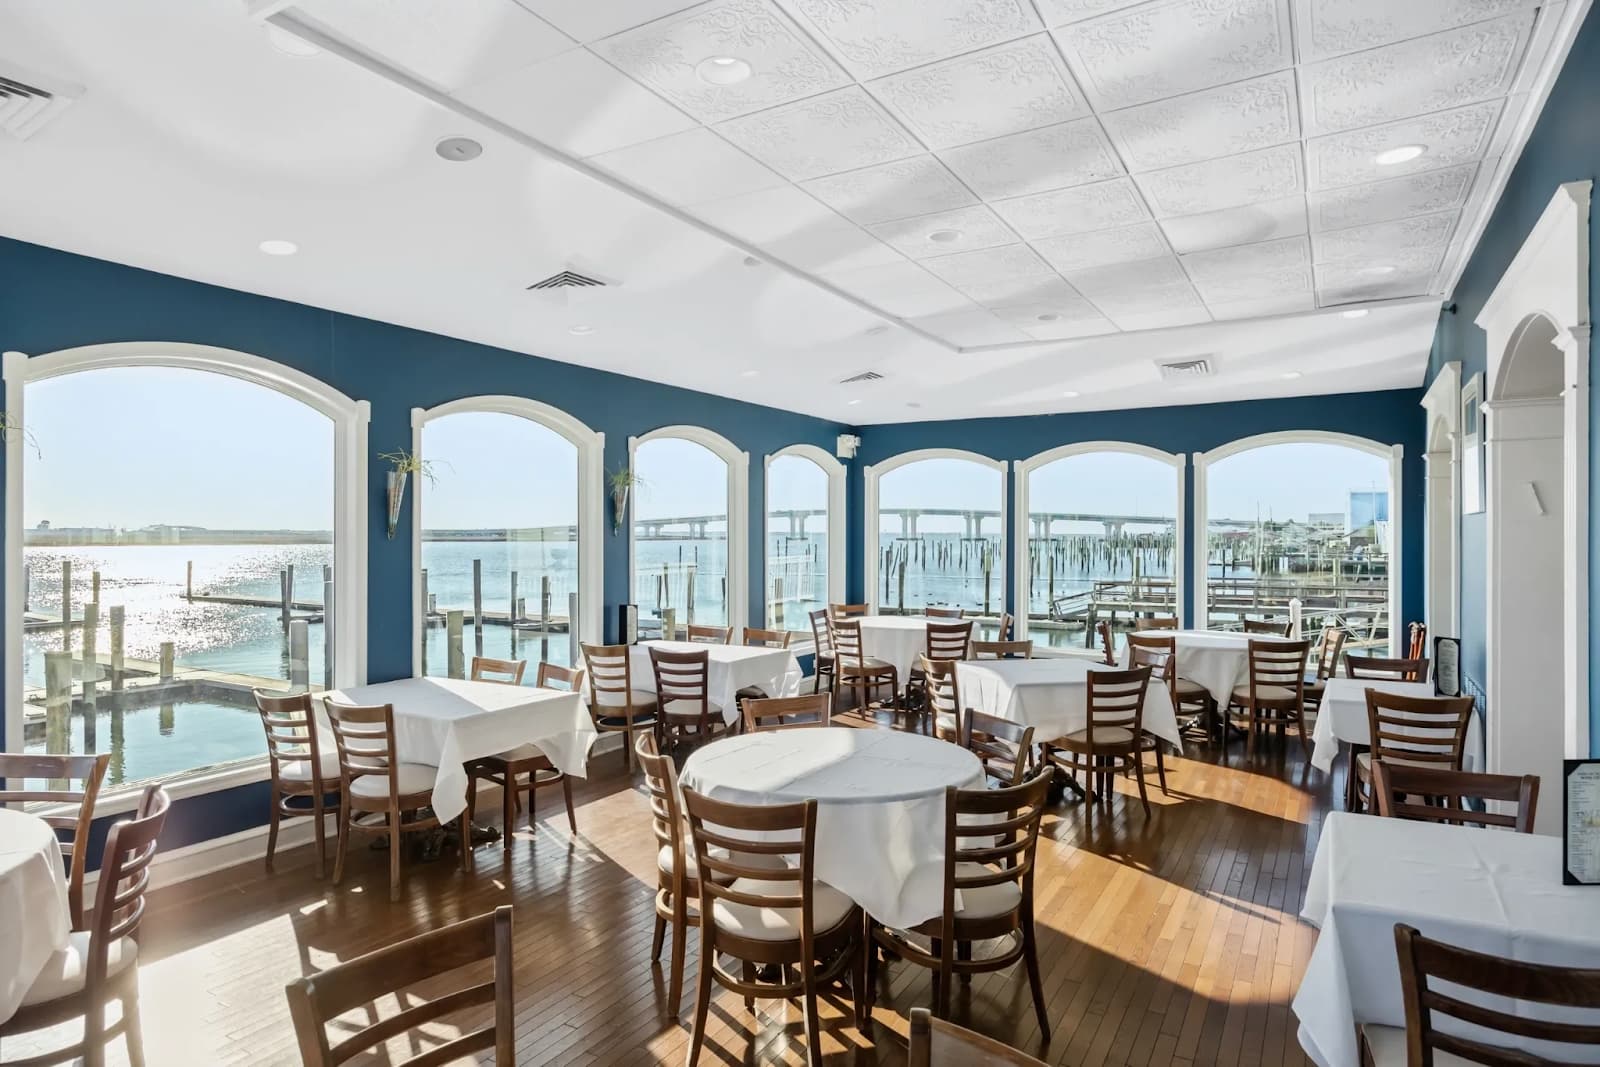 Tavern on the Bay: Where Sea Meets Cuisine and Culture